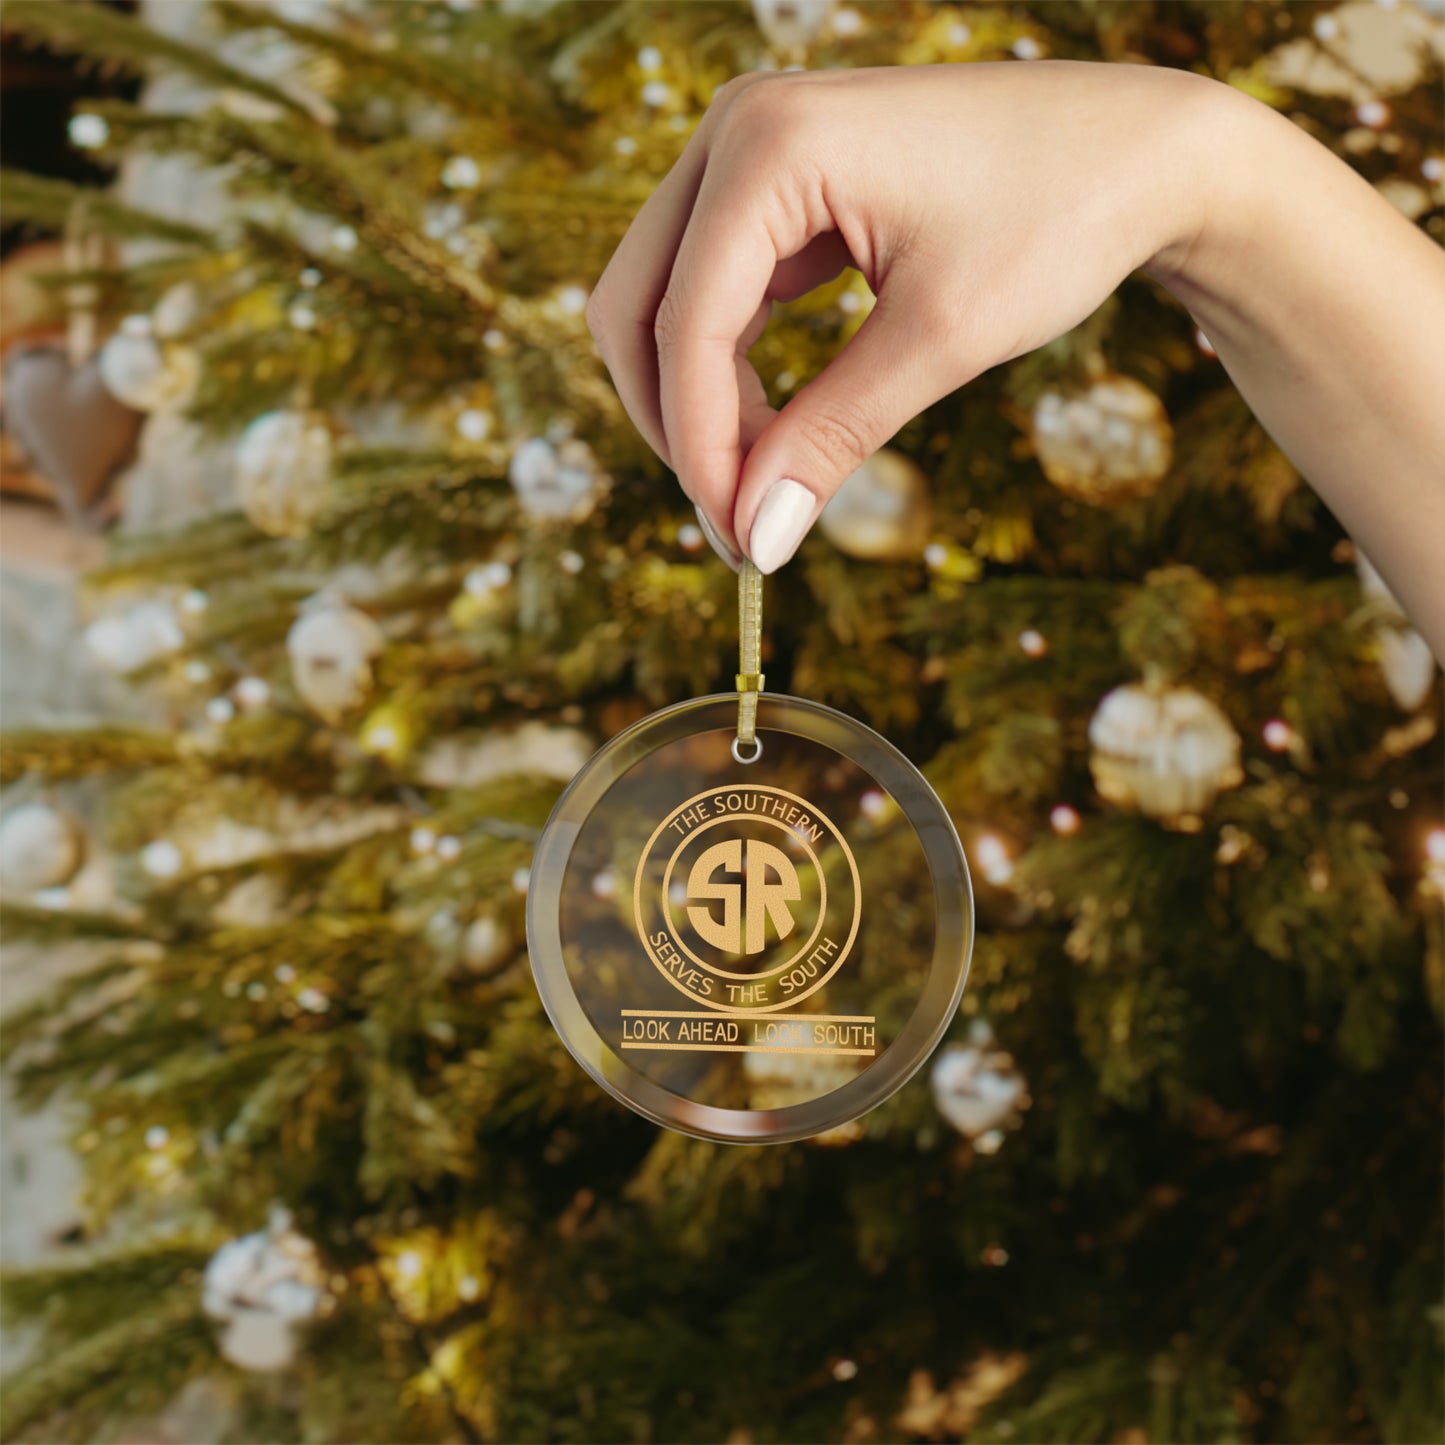 The Southern Serves the South Glass Ornament